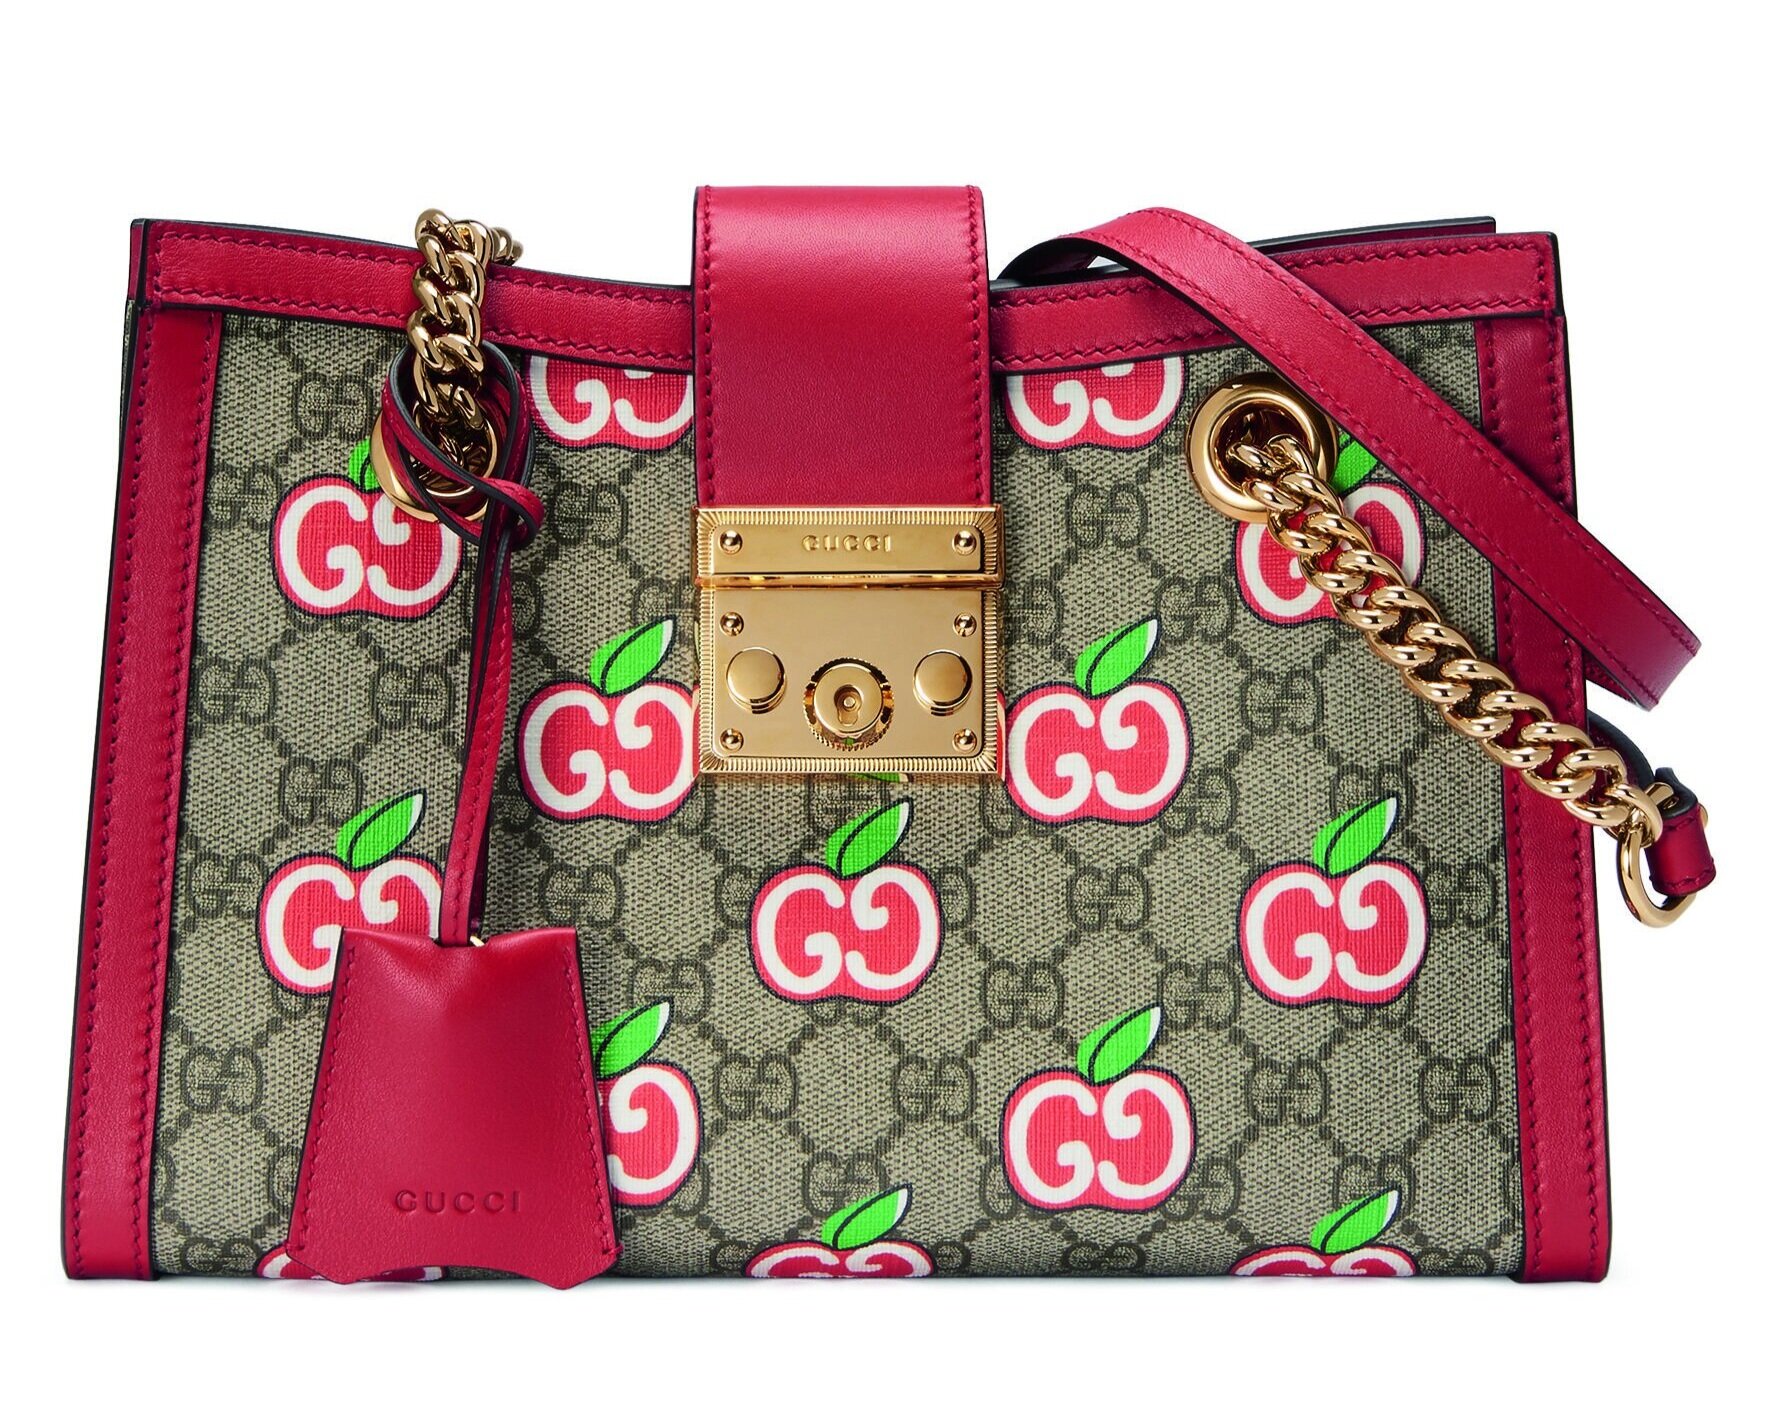 Gucci GG Supreme Valentine's Day Mini Box Bag - Handbag | Pre-owned & Certified | used Second Hand | Unisex